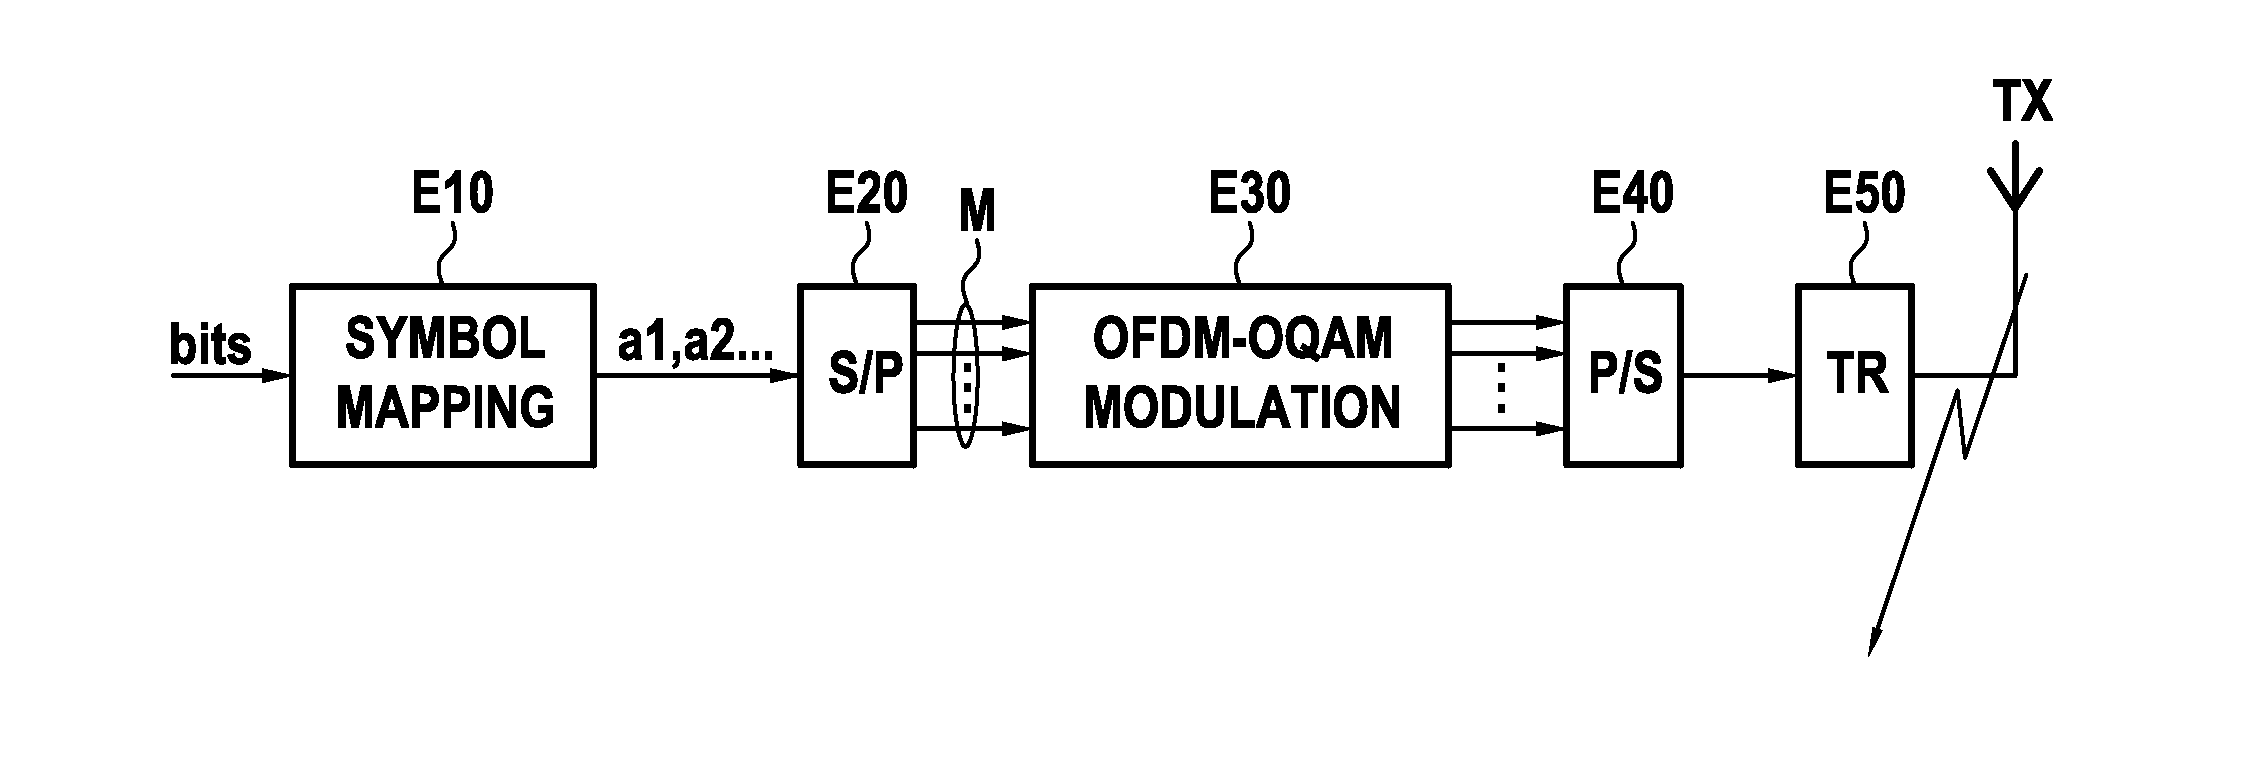 Method for transmitting at least one multi-carrier signal consisting of ofdm-oqam symbols